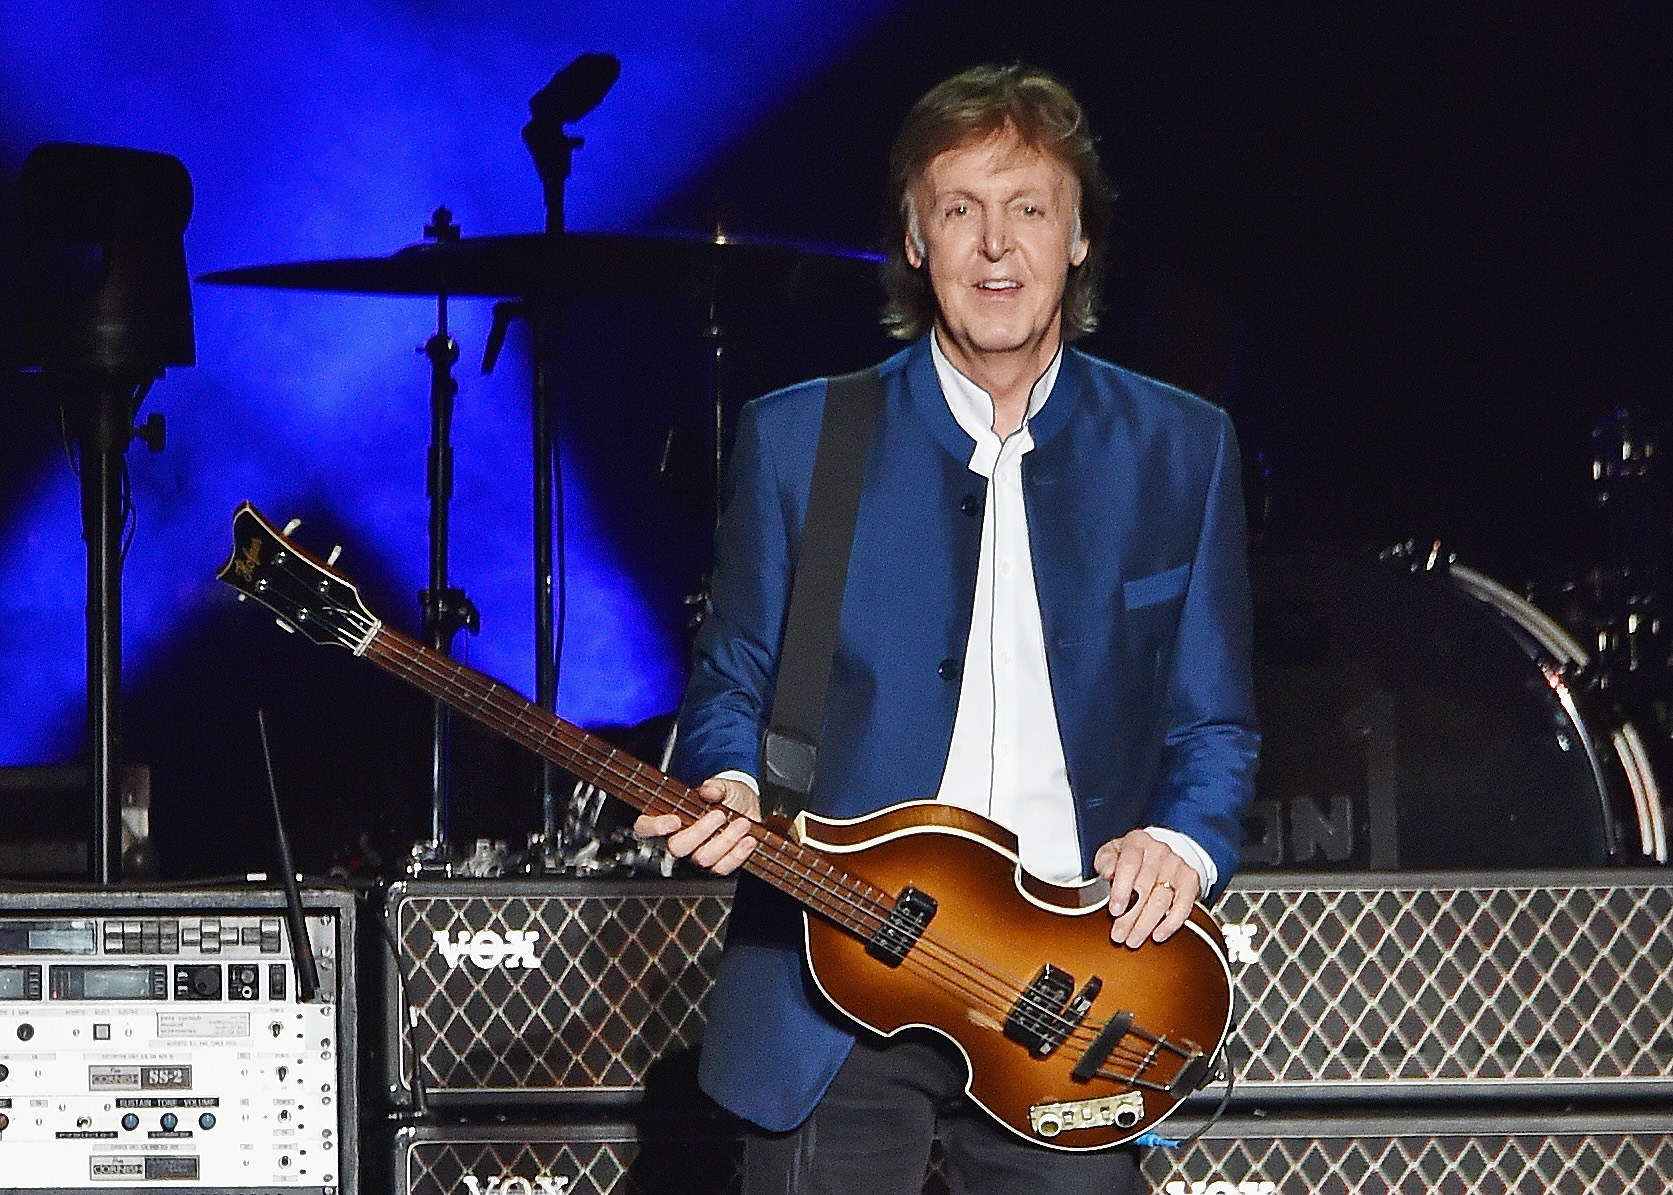 Paul McCartney performs in concert at MetLife Stadium on August 7, 2016 in East Rutherford, New Jersey